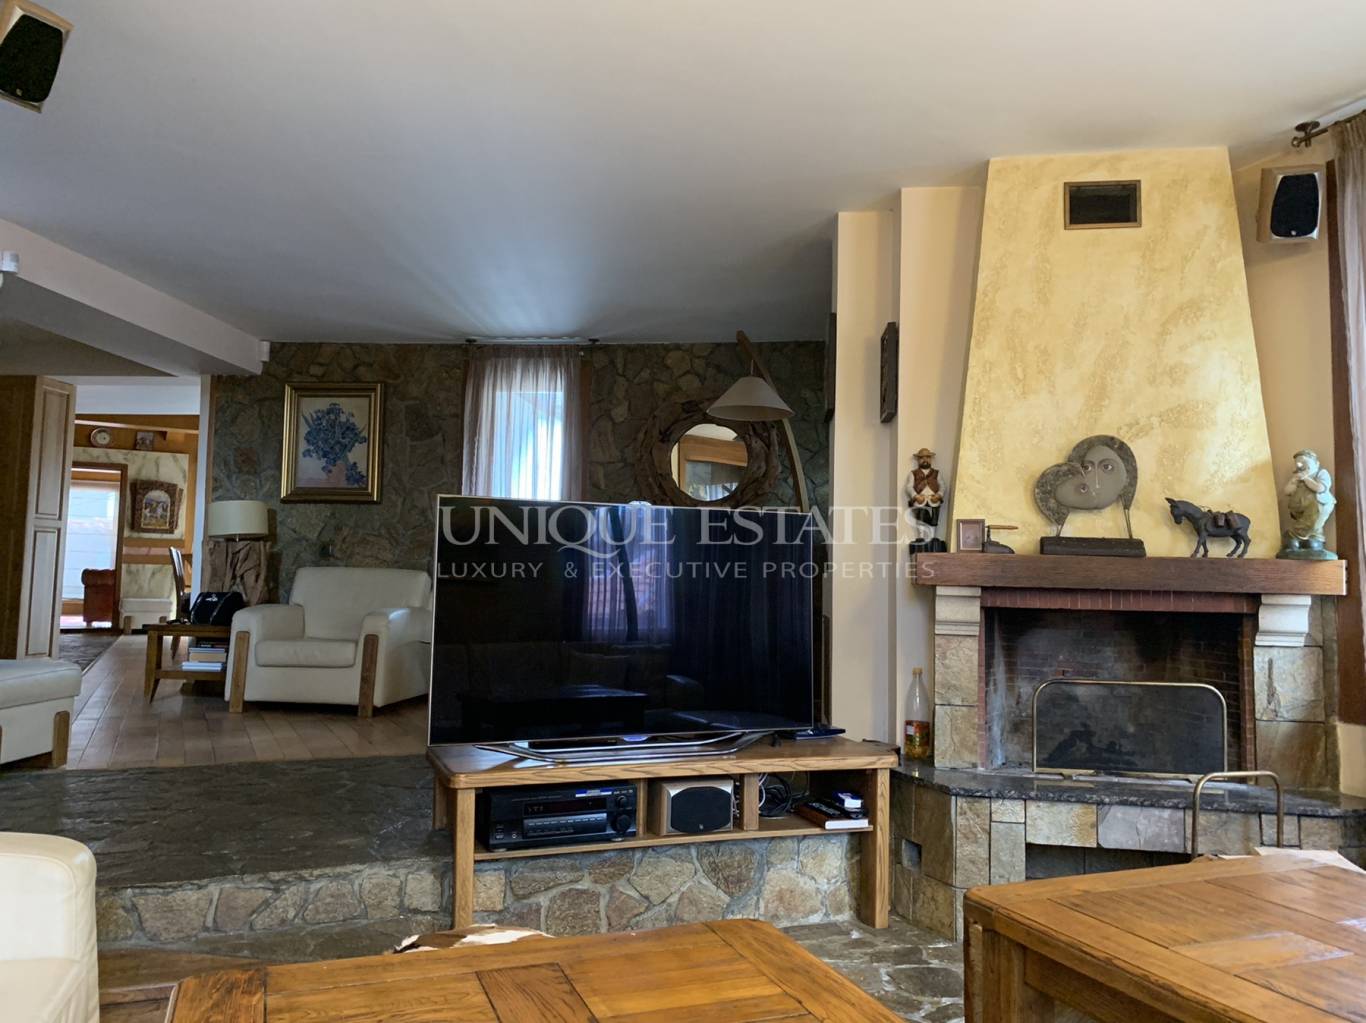 House for sale in Bansko,  with listing ID: K14981 - image 4